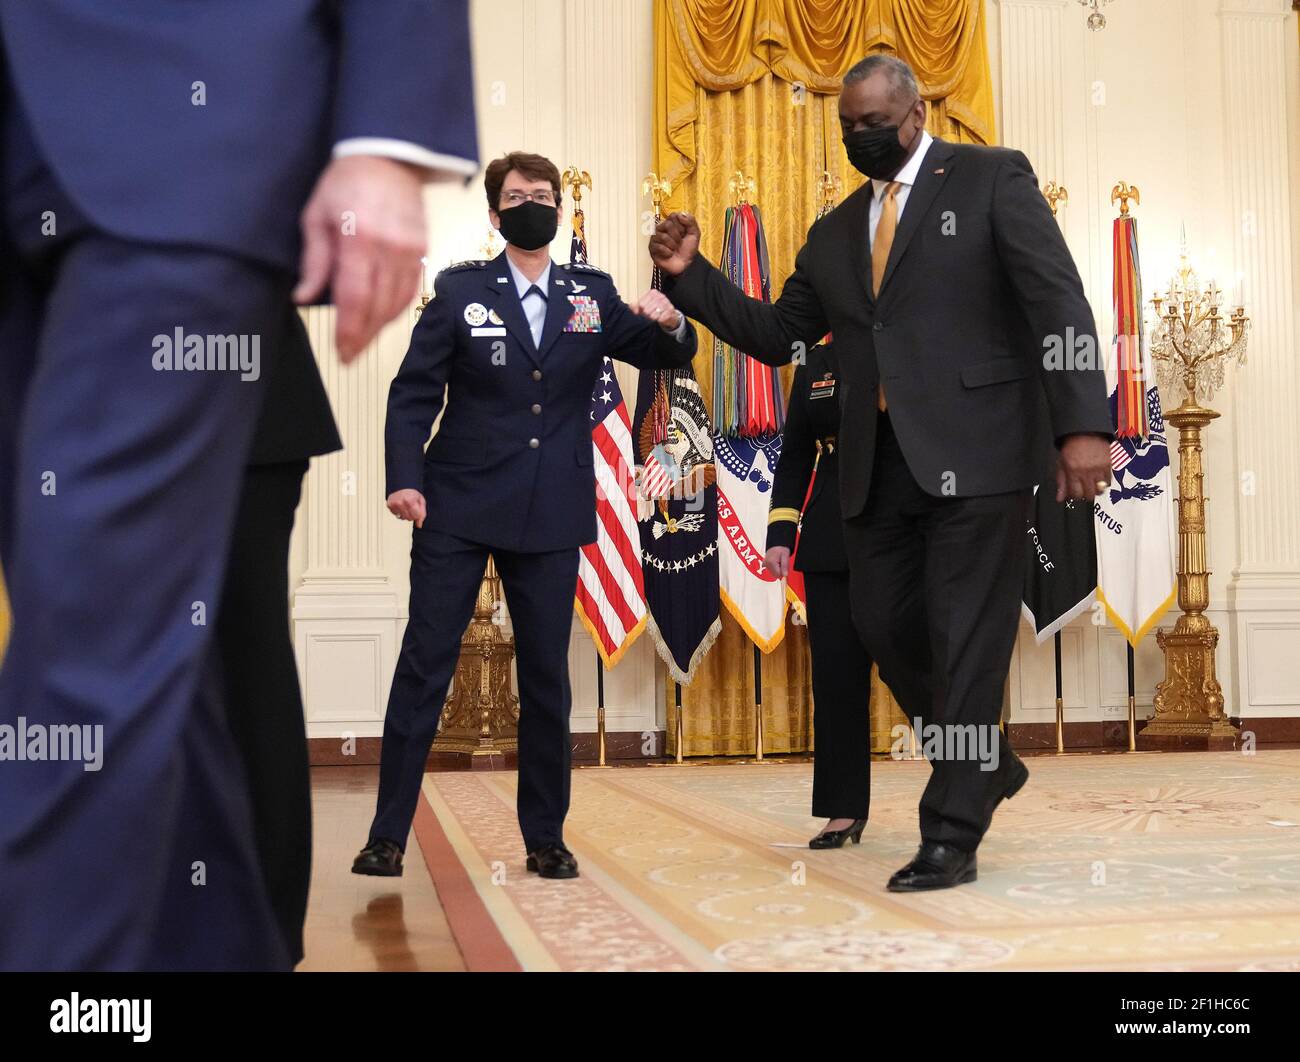 Washington, United States. 08th Mar, 2021. President Joe Biden's Combatant Commander nominee Air Force Gen. Jacqueline Van Ovost fist bumps Defense Secretary Lloyd Austin after Biden introduced her and Army Lt. Gen. Laura Richardson as his nominees, in the East Room at the White House in Washington, DC on Monday, March 8, 2021. Ovost has been nominated to lead the Transportation Command and Richardson, has been nominated to lead military activities in Latin America at Southern Command. Photo by Kevin Dietsch/UPI Credit: UPI/Alamy Live News Stock Photo